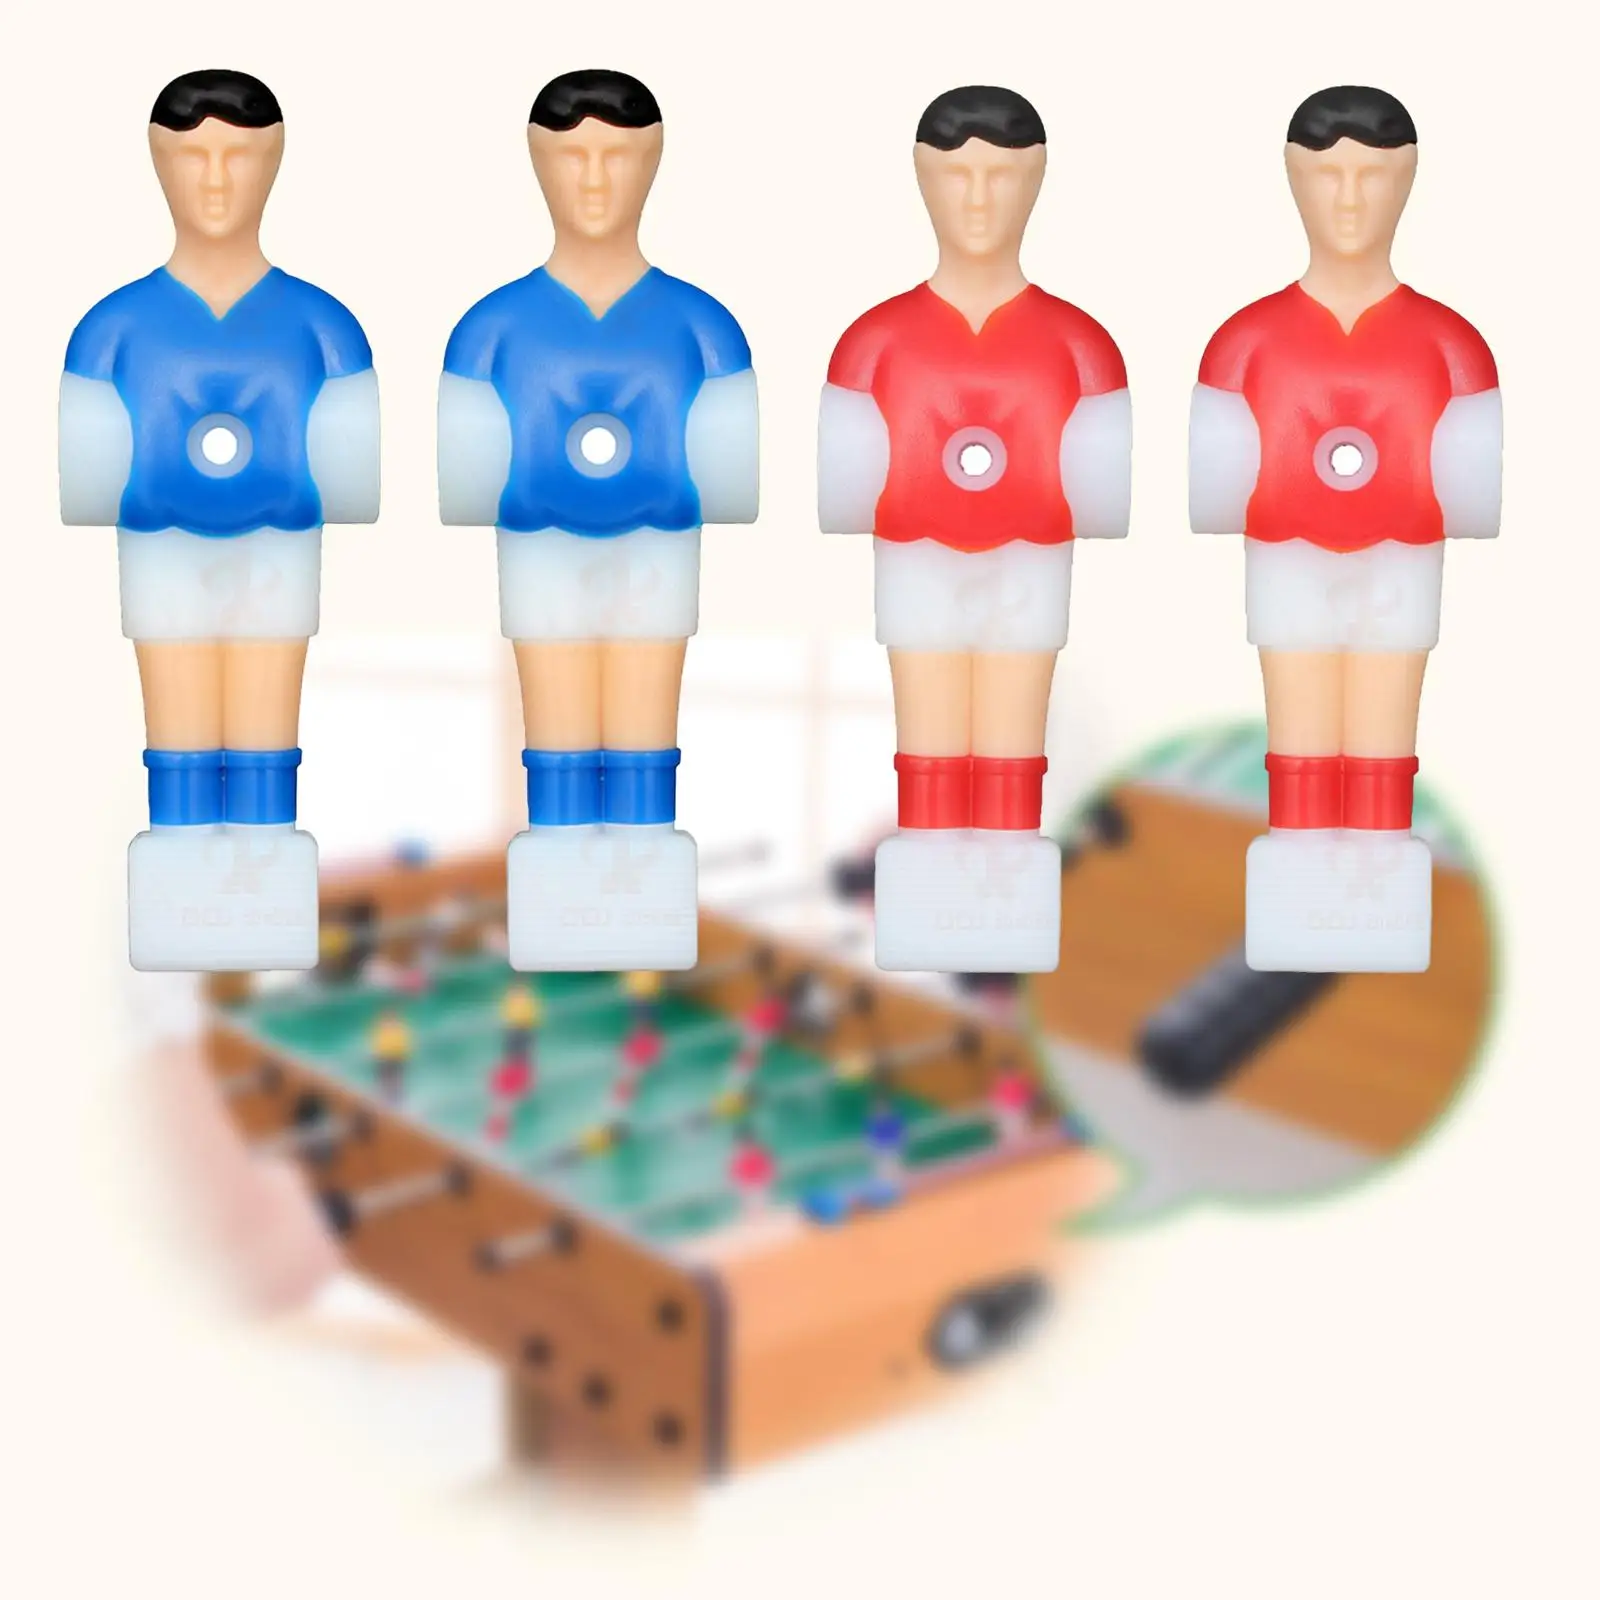 4Pcs Mini Doll Table Football Men Replacement Soccer Table Player Football Players Figures Toys Table Football Player Accessory